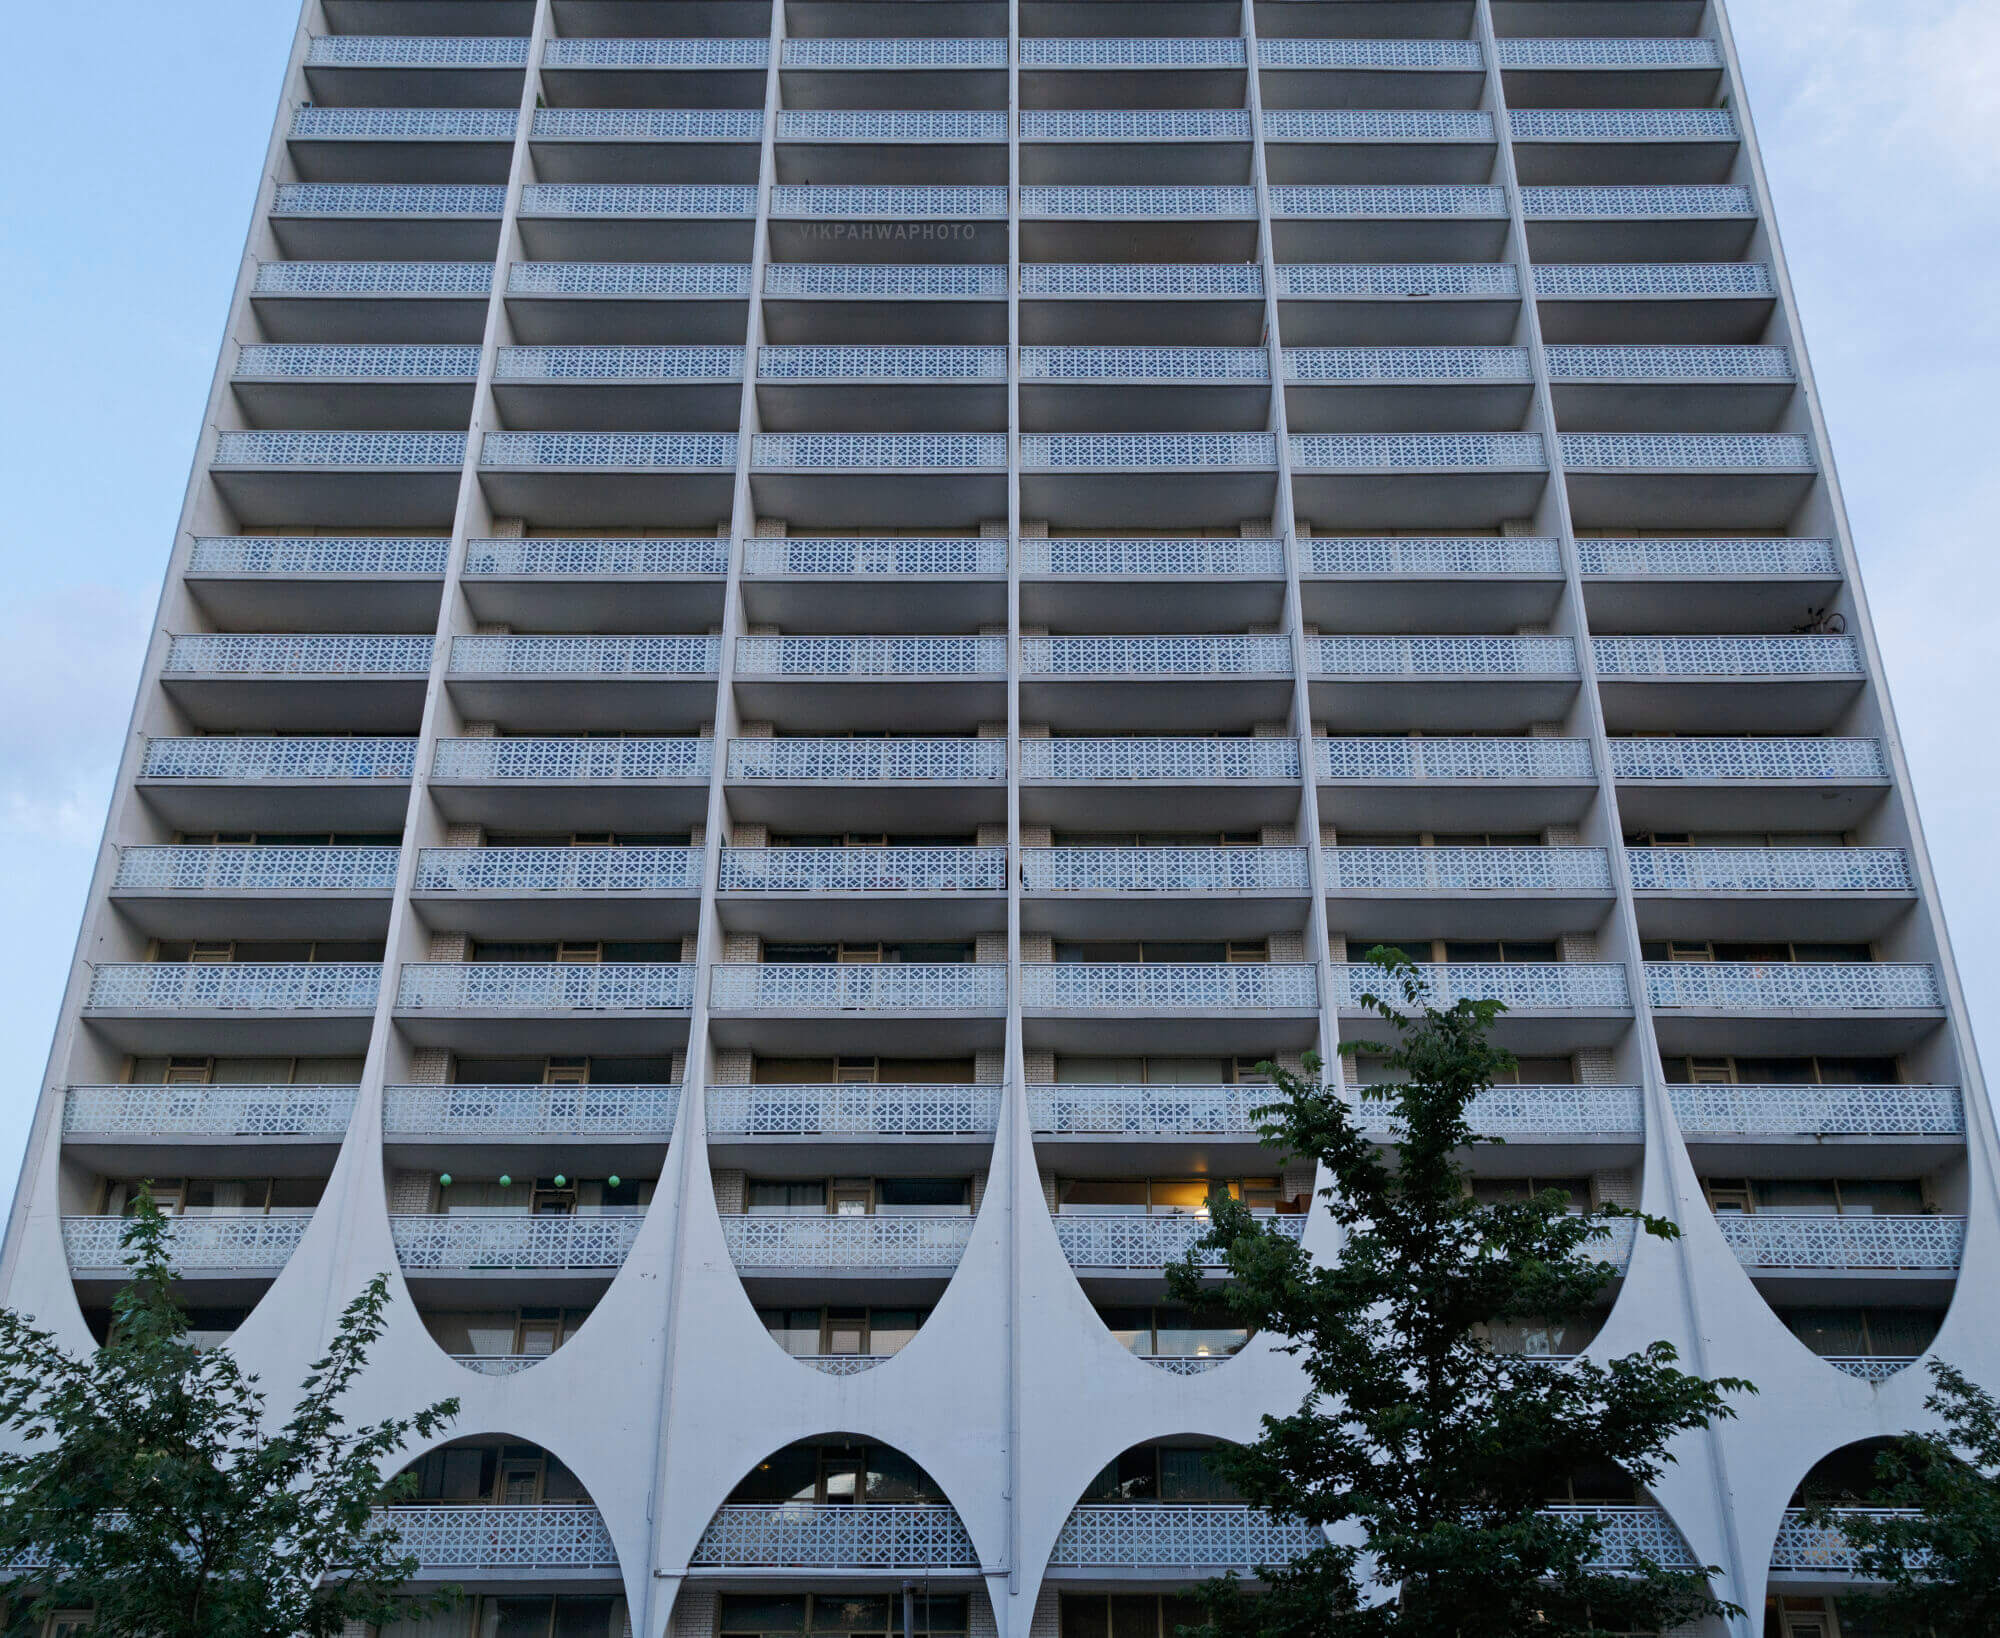 A large rectangular apartment building. Teh building is white and hads many windows and balconies.